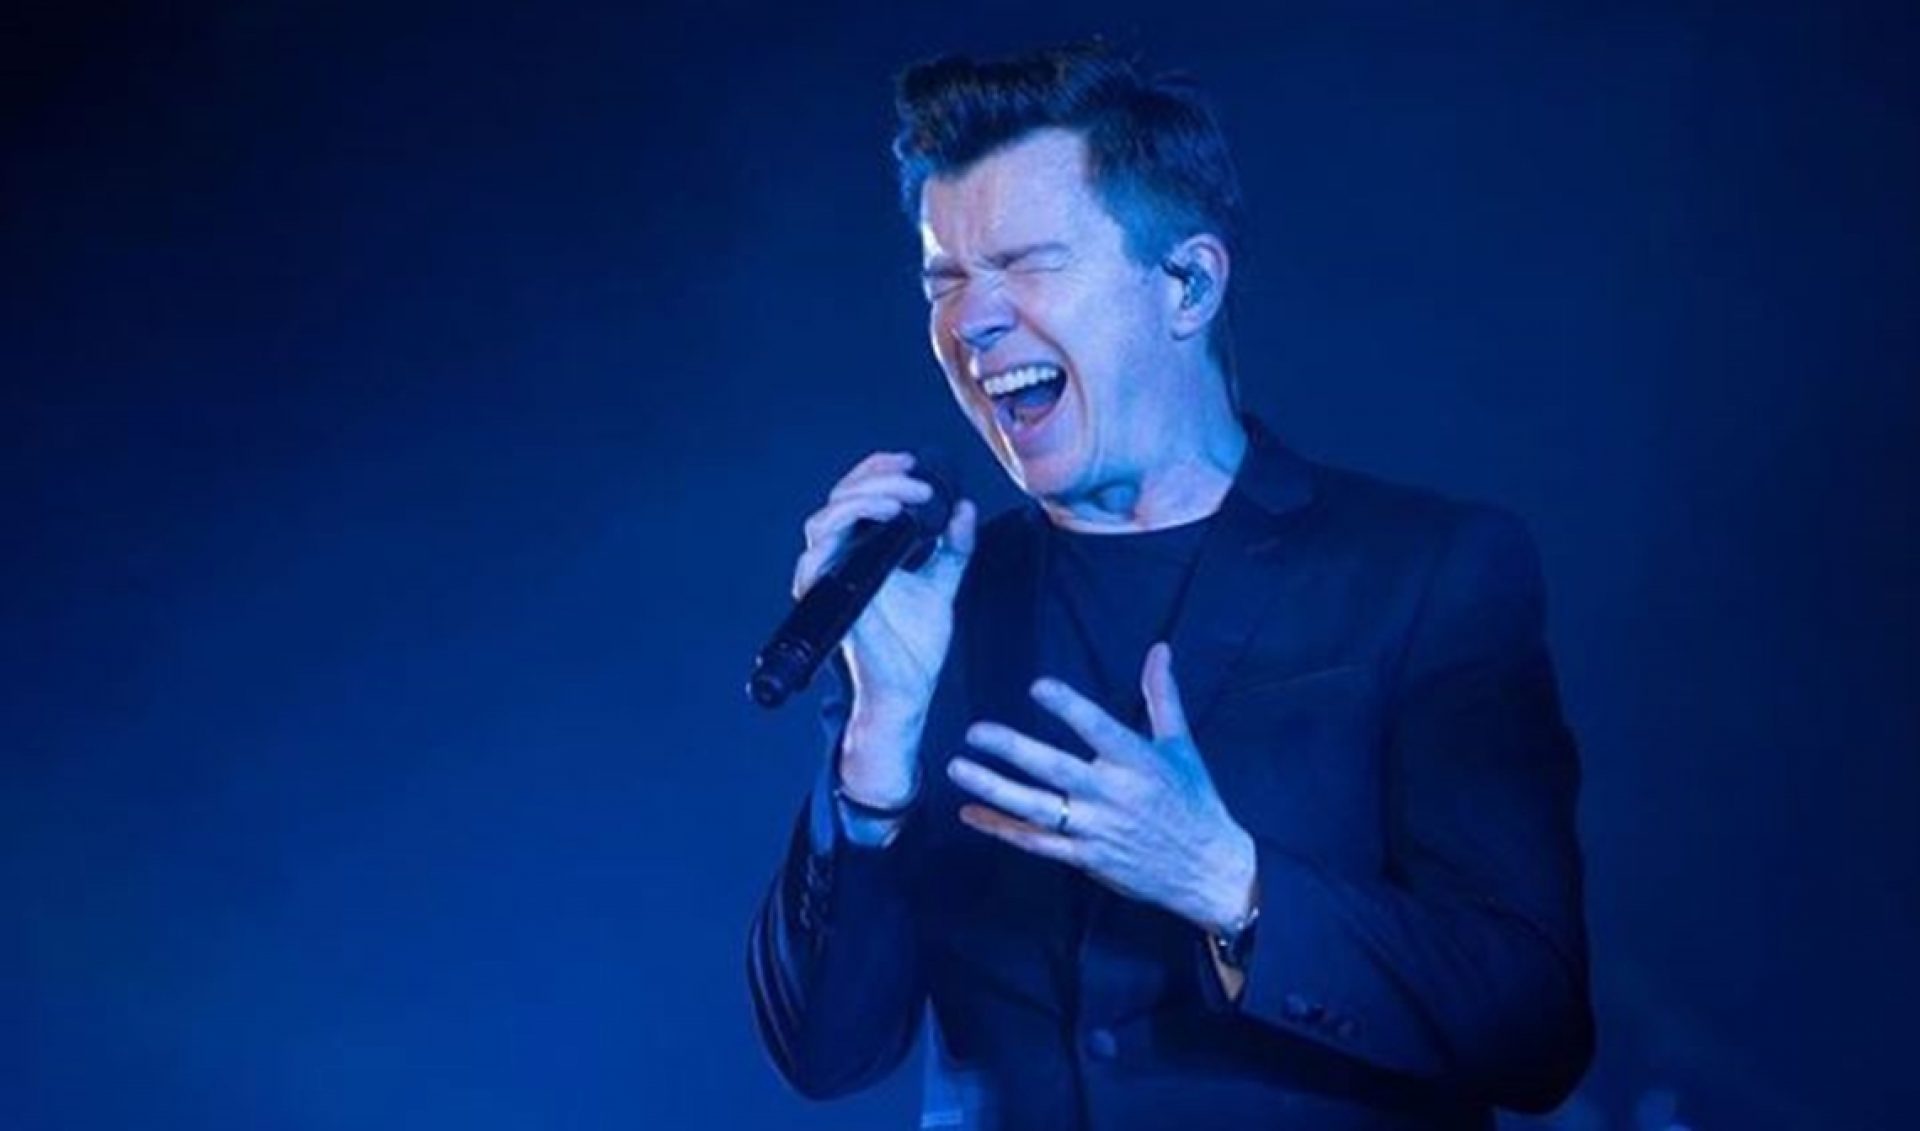 Rick Astley’s “Never Gonna Give You Up” Sees Massive YouTube Spike Each April Fools’ Day